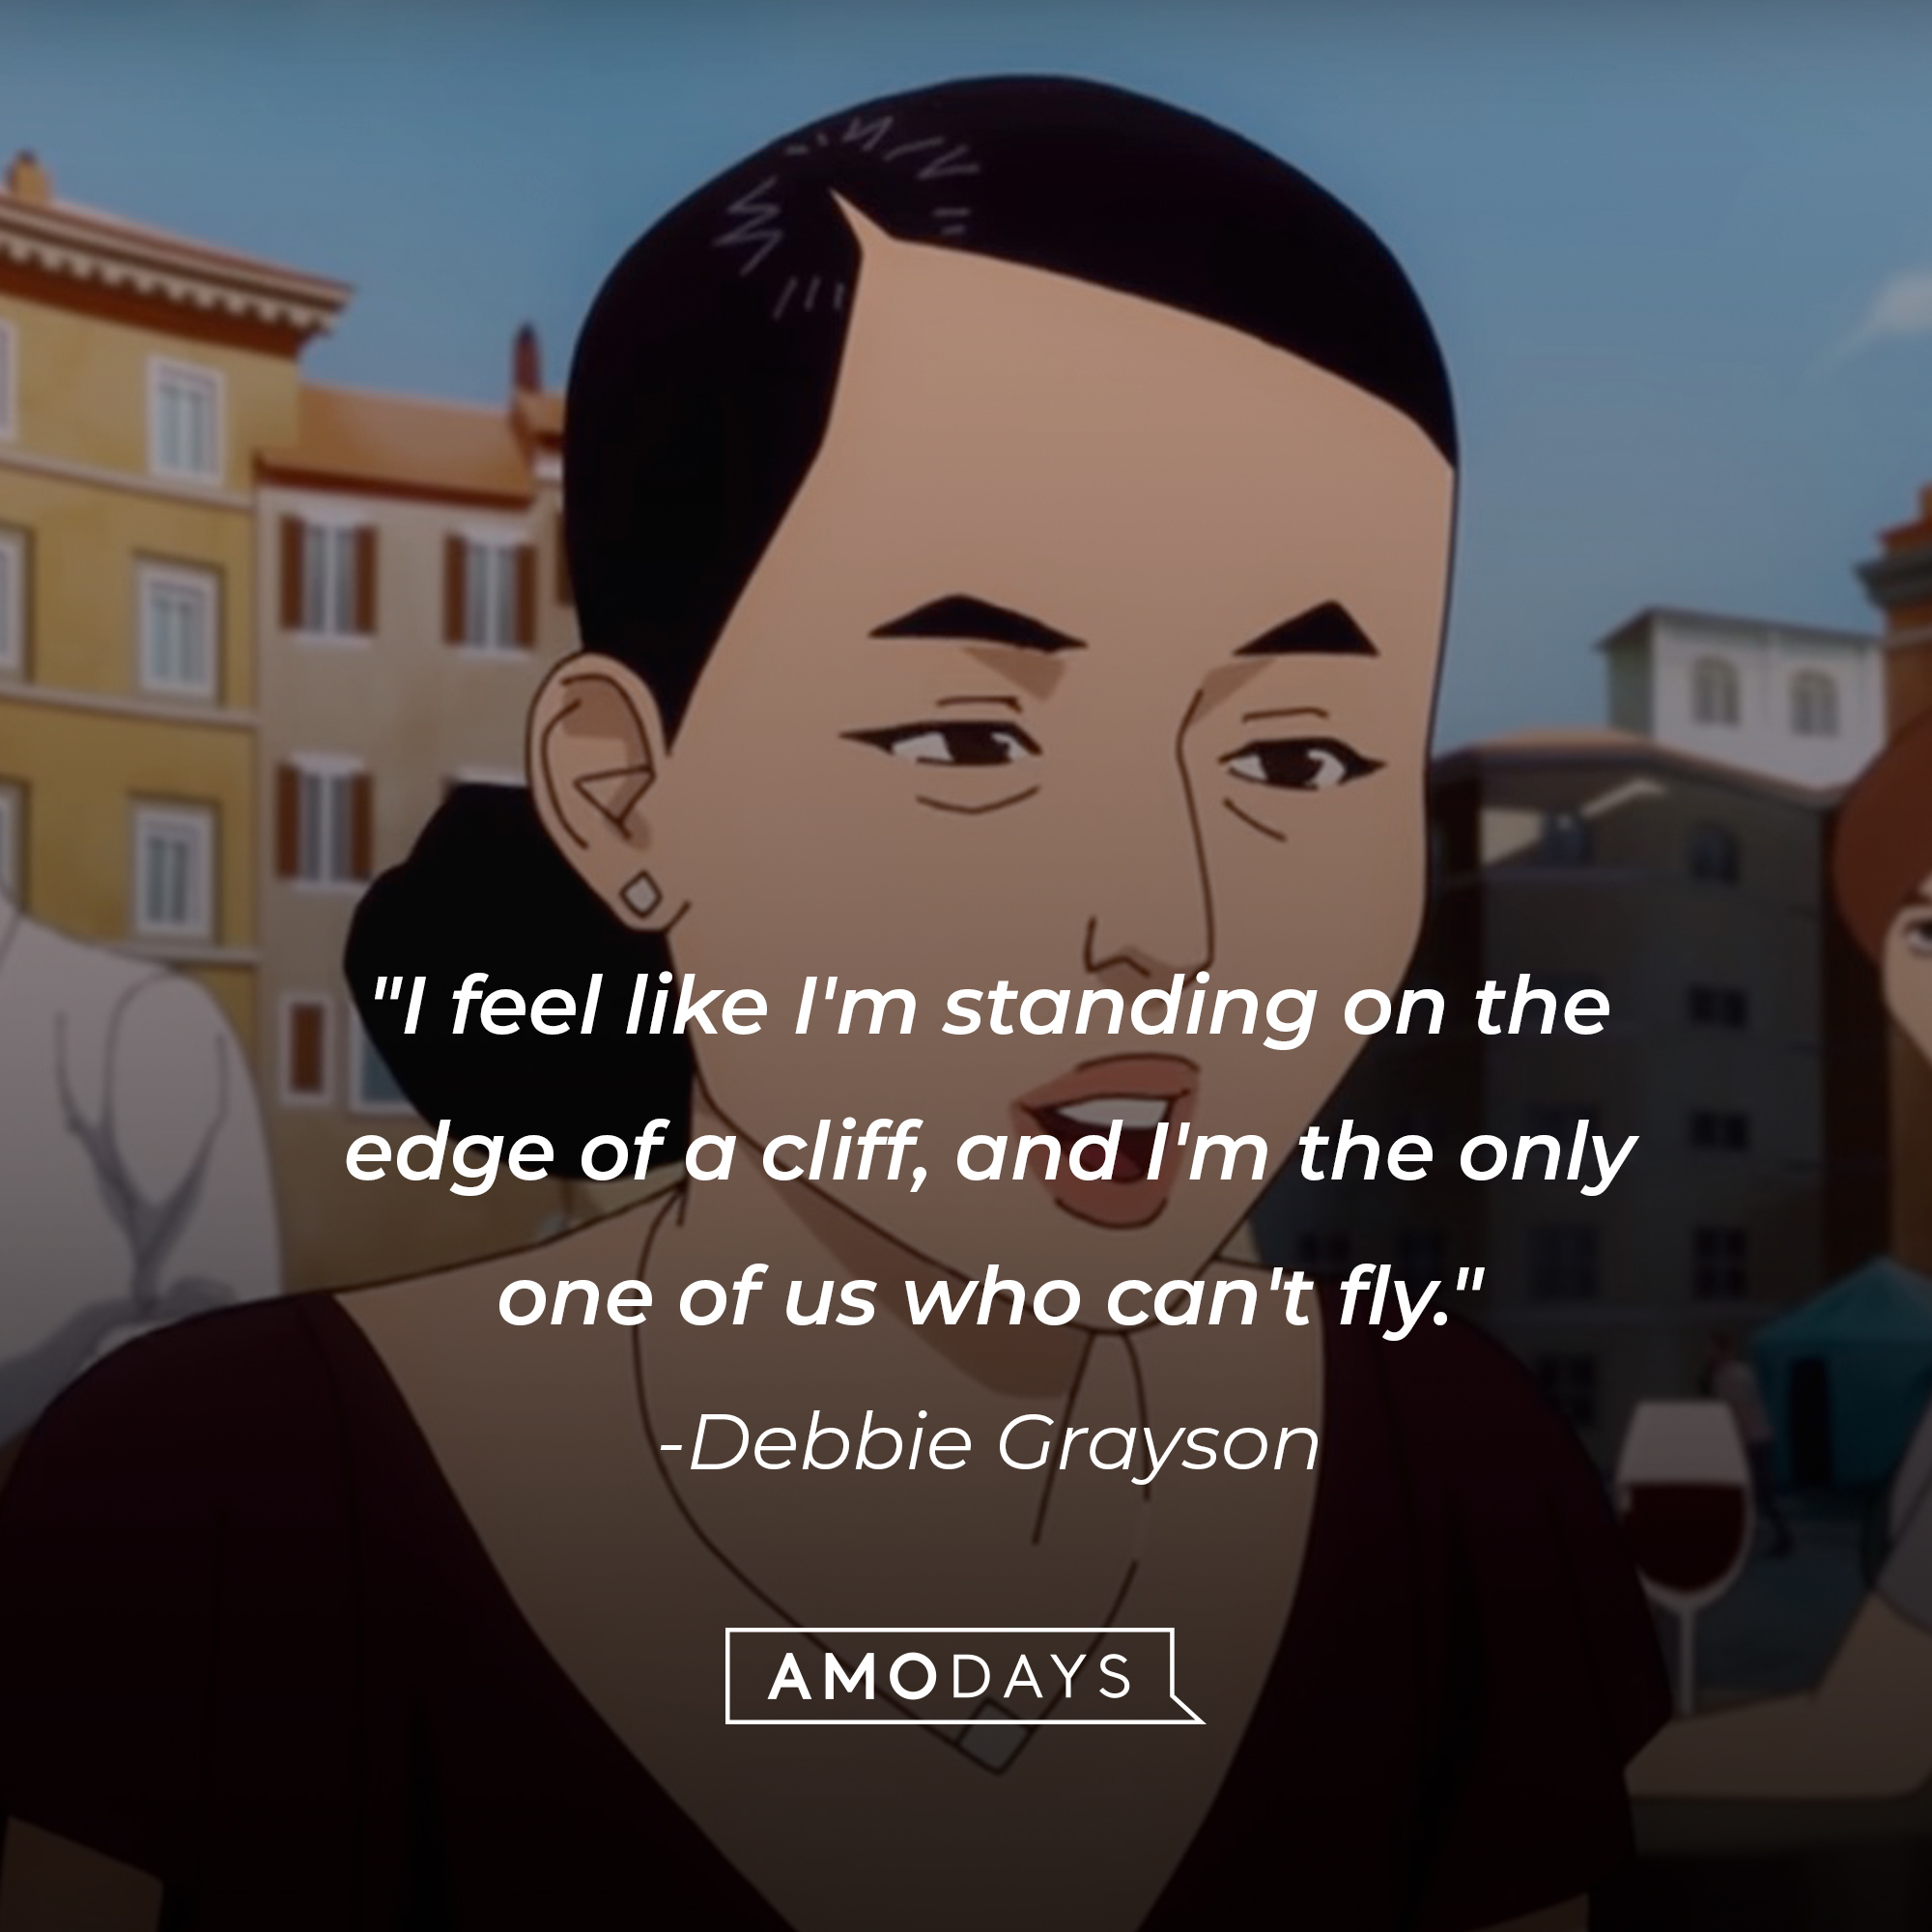 Debbie Grayson's quote: "I feel like I'm standing on the edge of a cliff, and I'm the only one of us who can't fly." | Source: Facebook.com/Invincibleuniverse